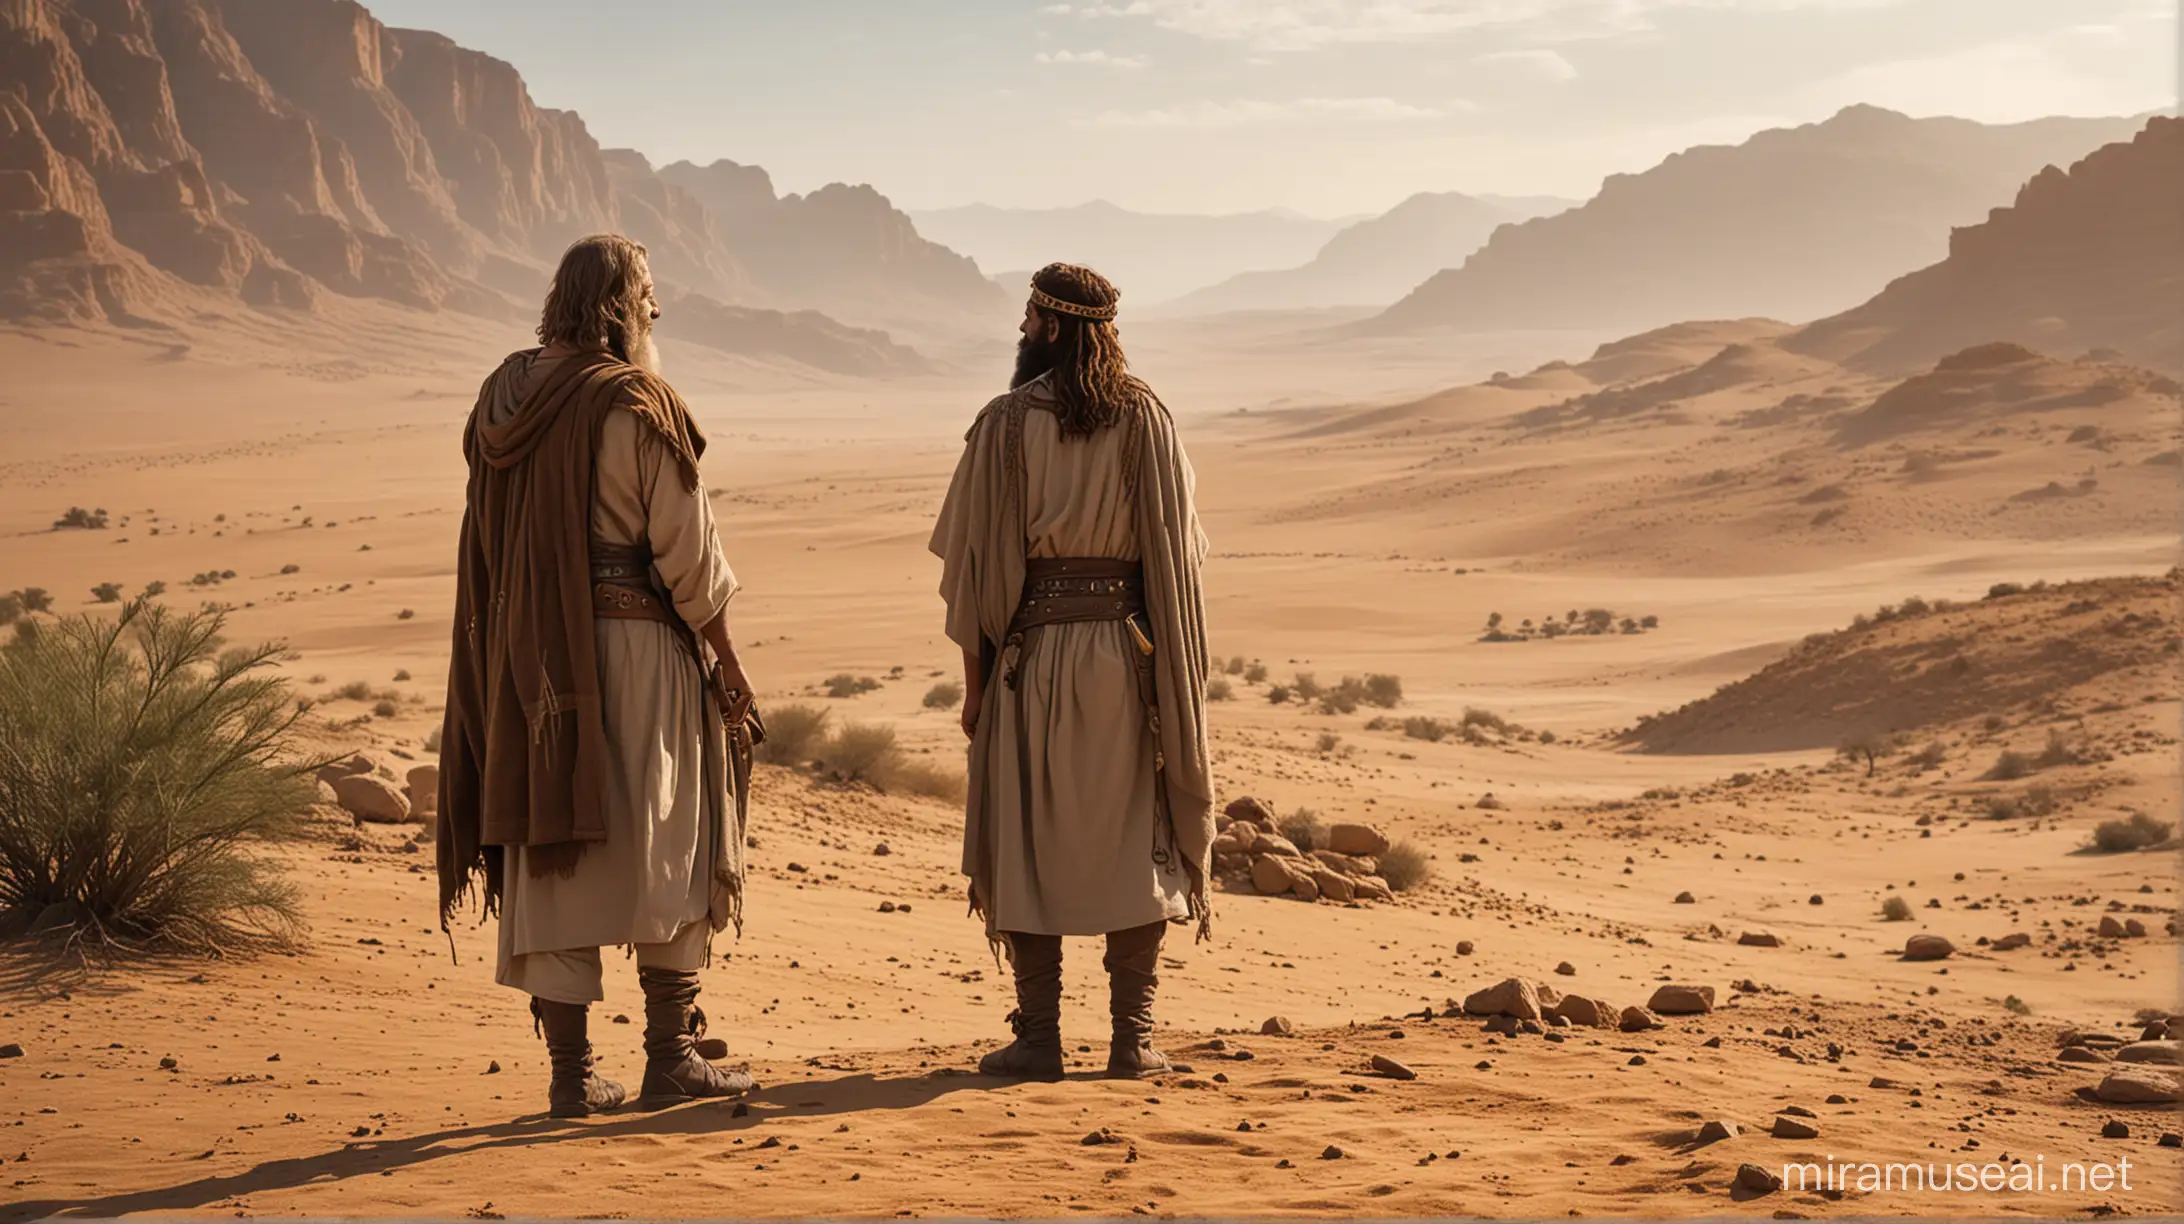 Abraham has a conversation in the desert with a King Elam in the biblical era